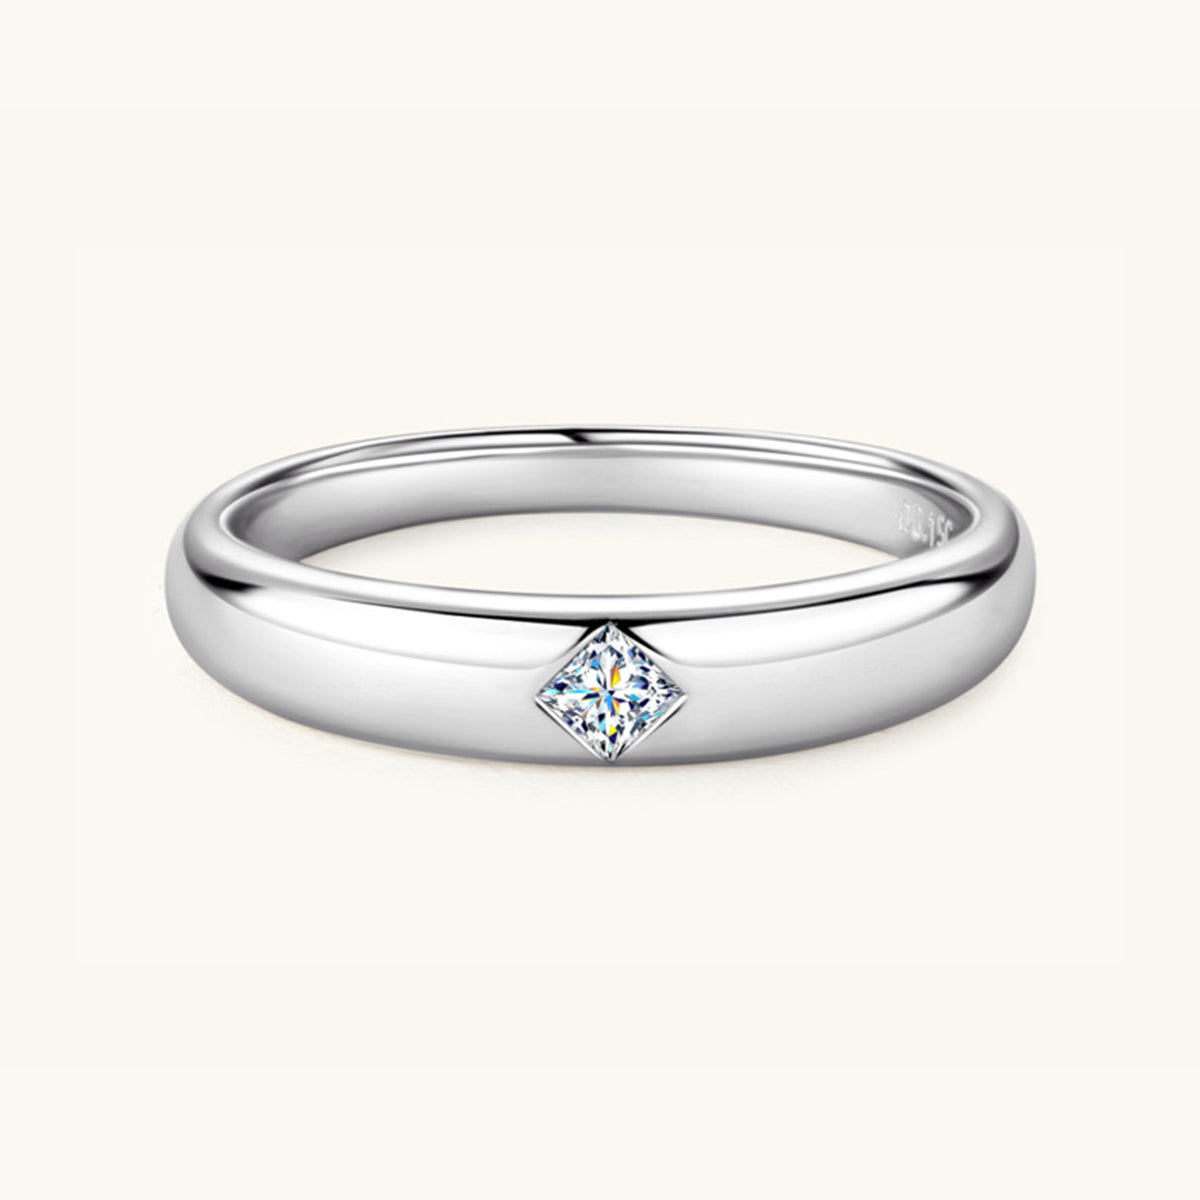 STERLING SILVER INLAID MOISSANITE RING